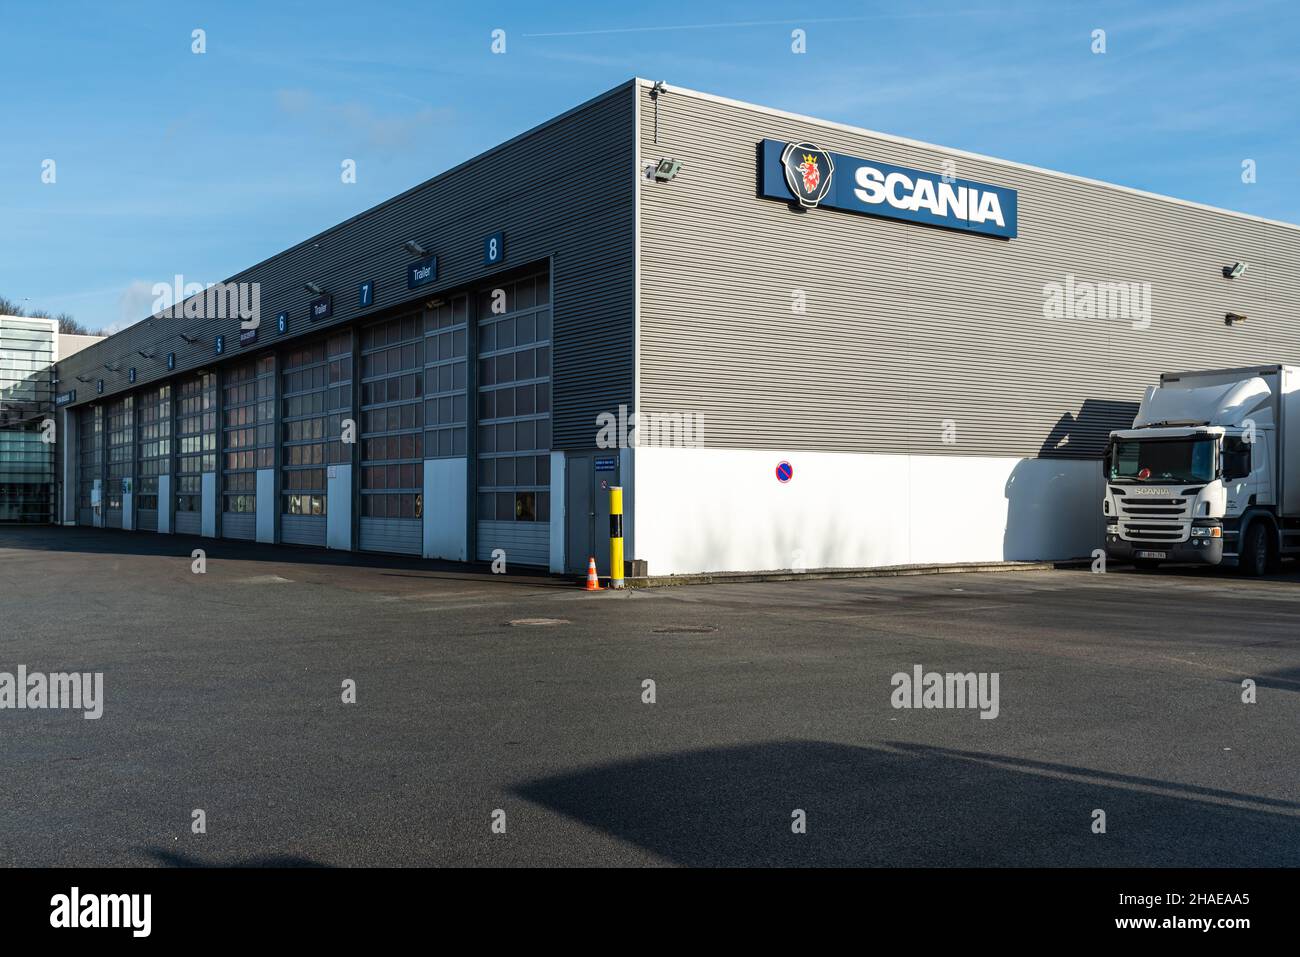 Neder-Over-Heembeek, Brussels, Belgium - 12 11 2021: The Scania automotive industry company Stock Photo